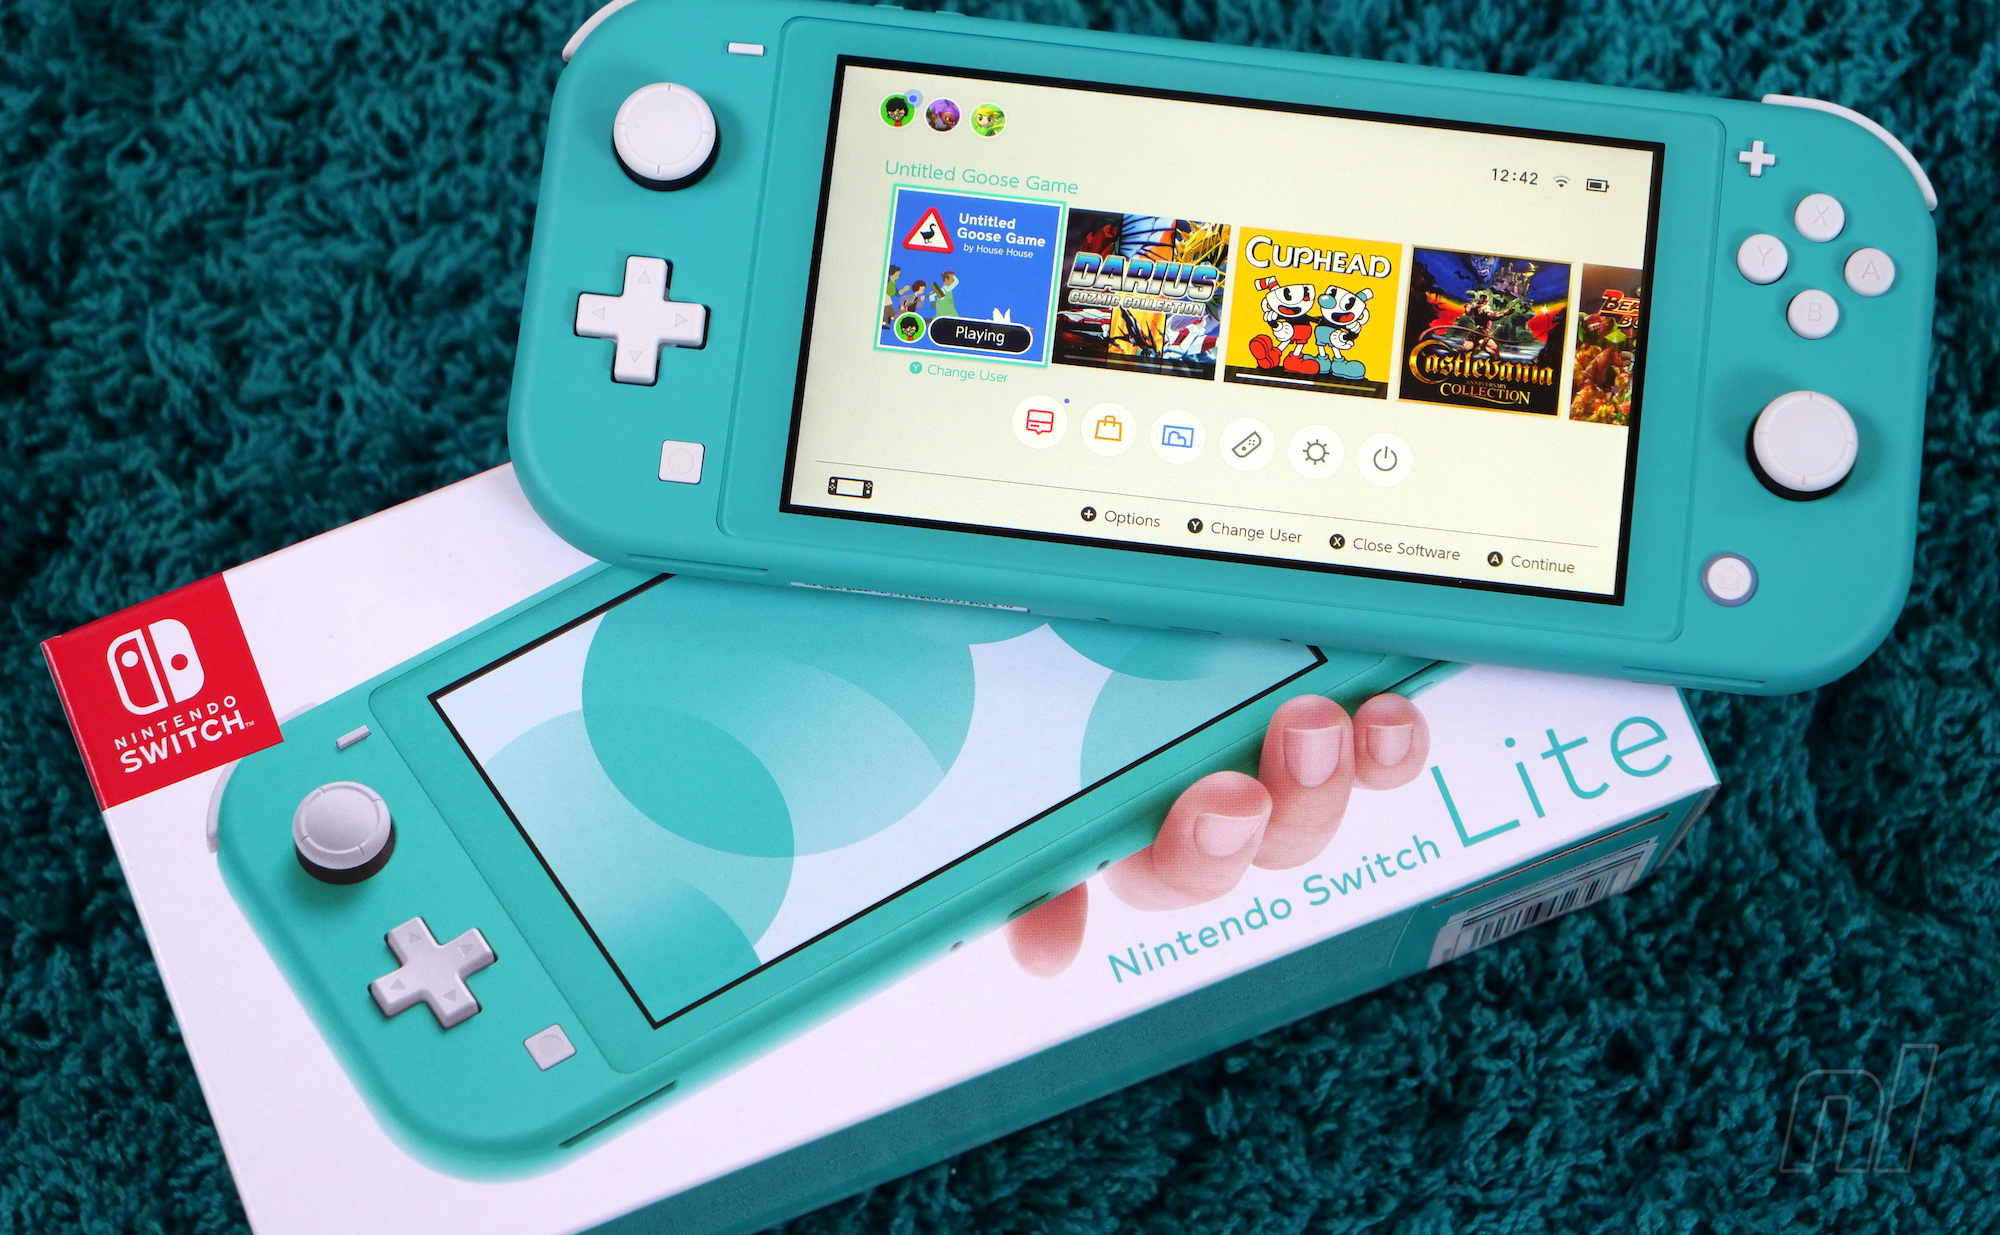 can you play 3ds games on switch lite